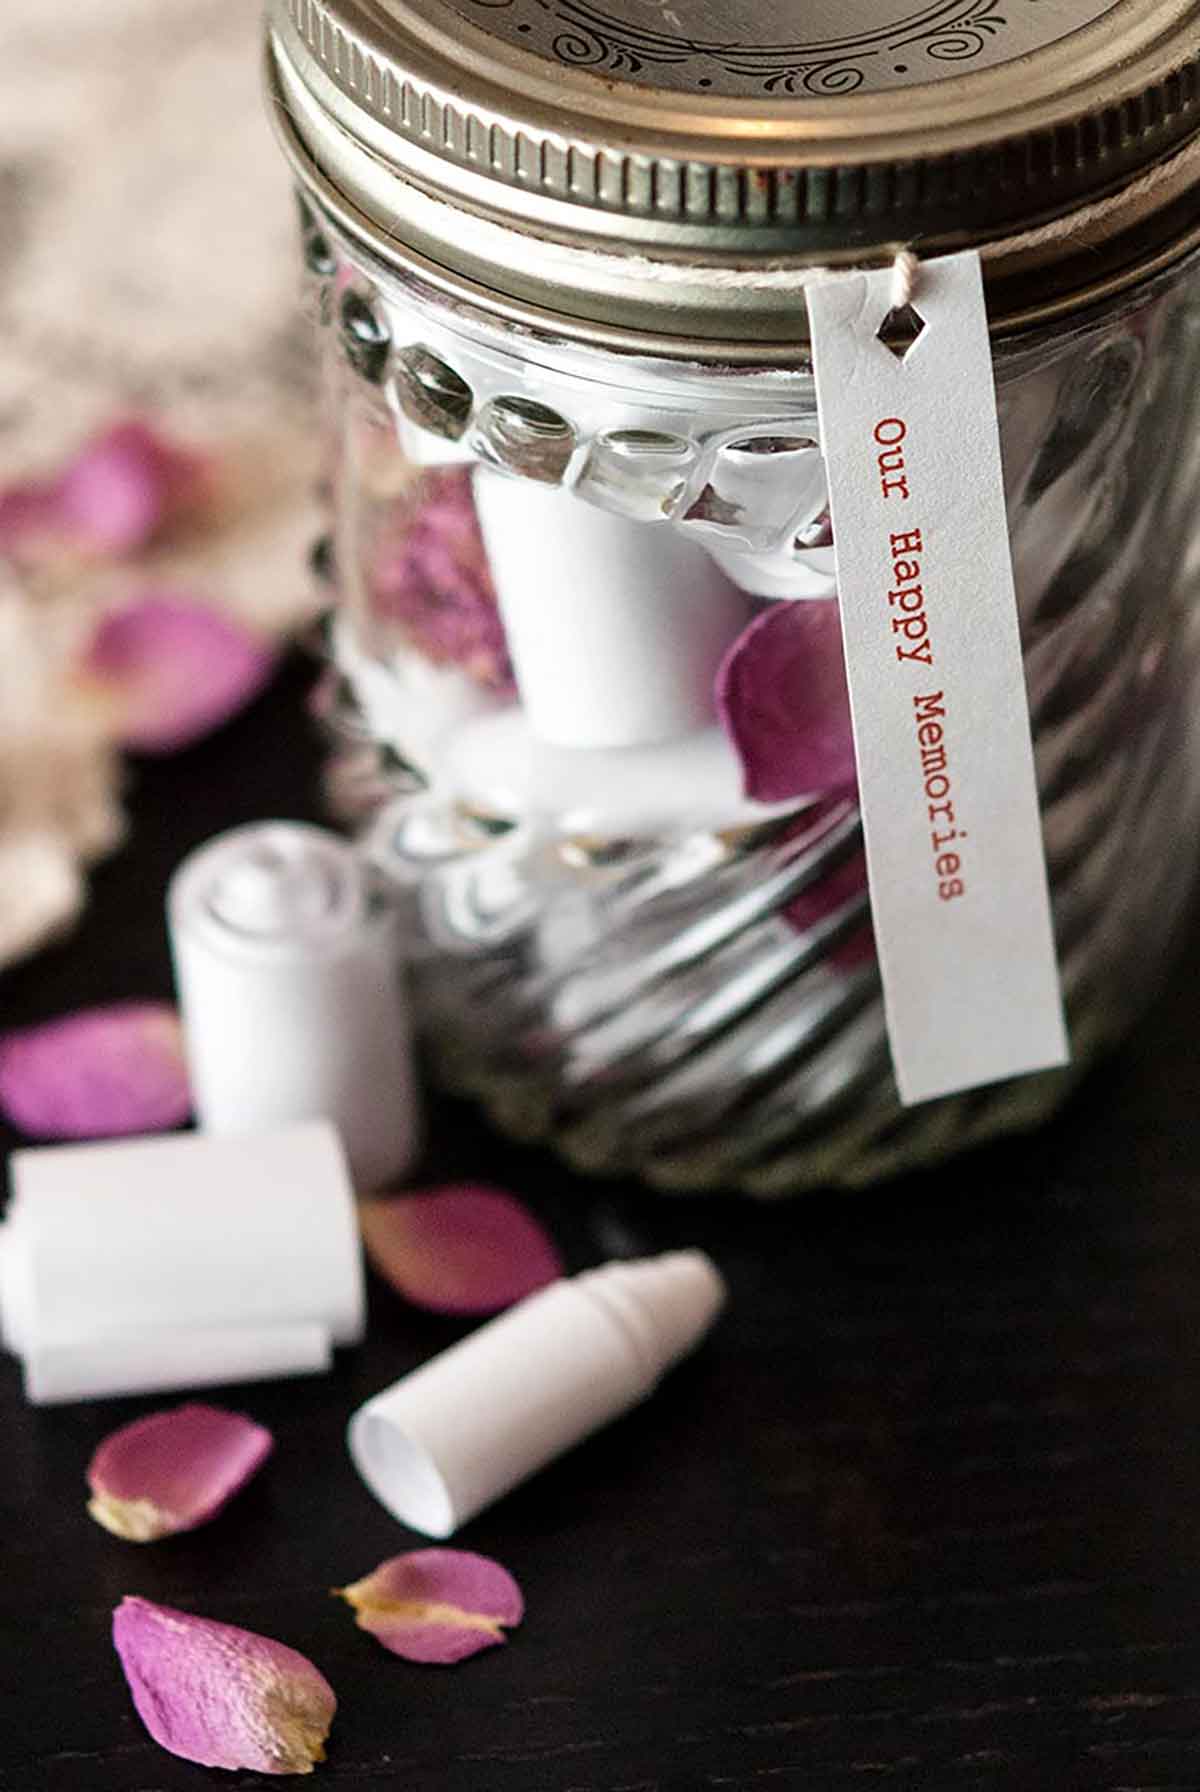 A jar with tiny scrolls inside and outside of it on a black table, sprinkled with rose petals.